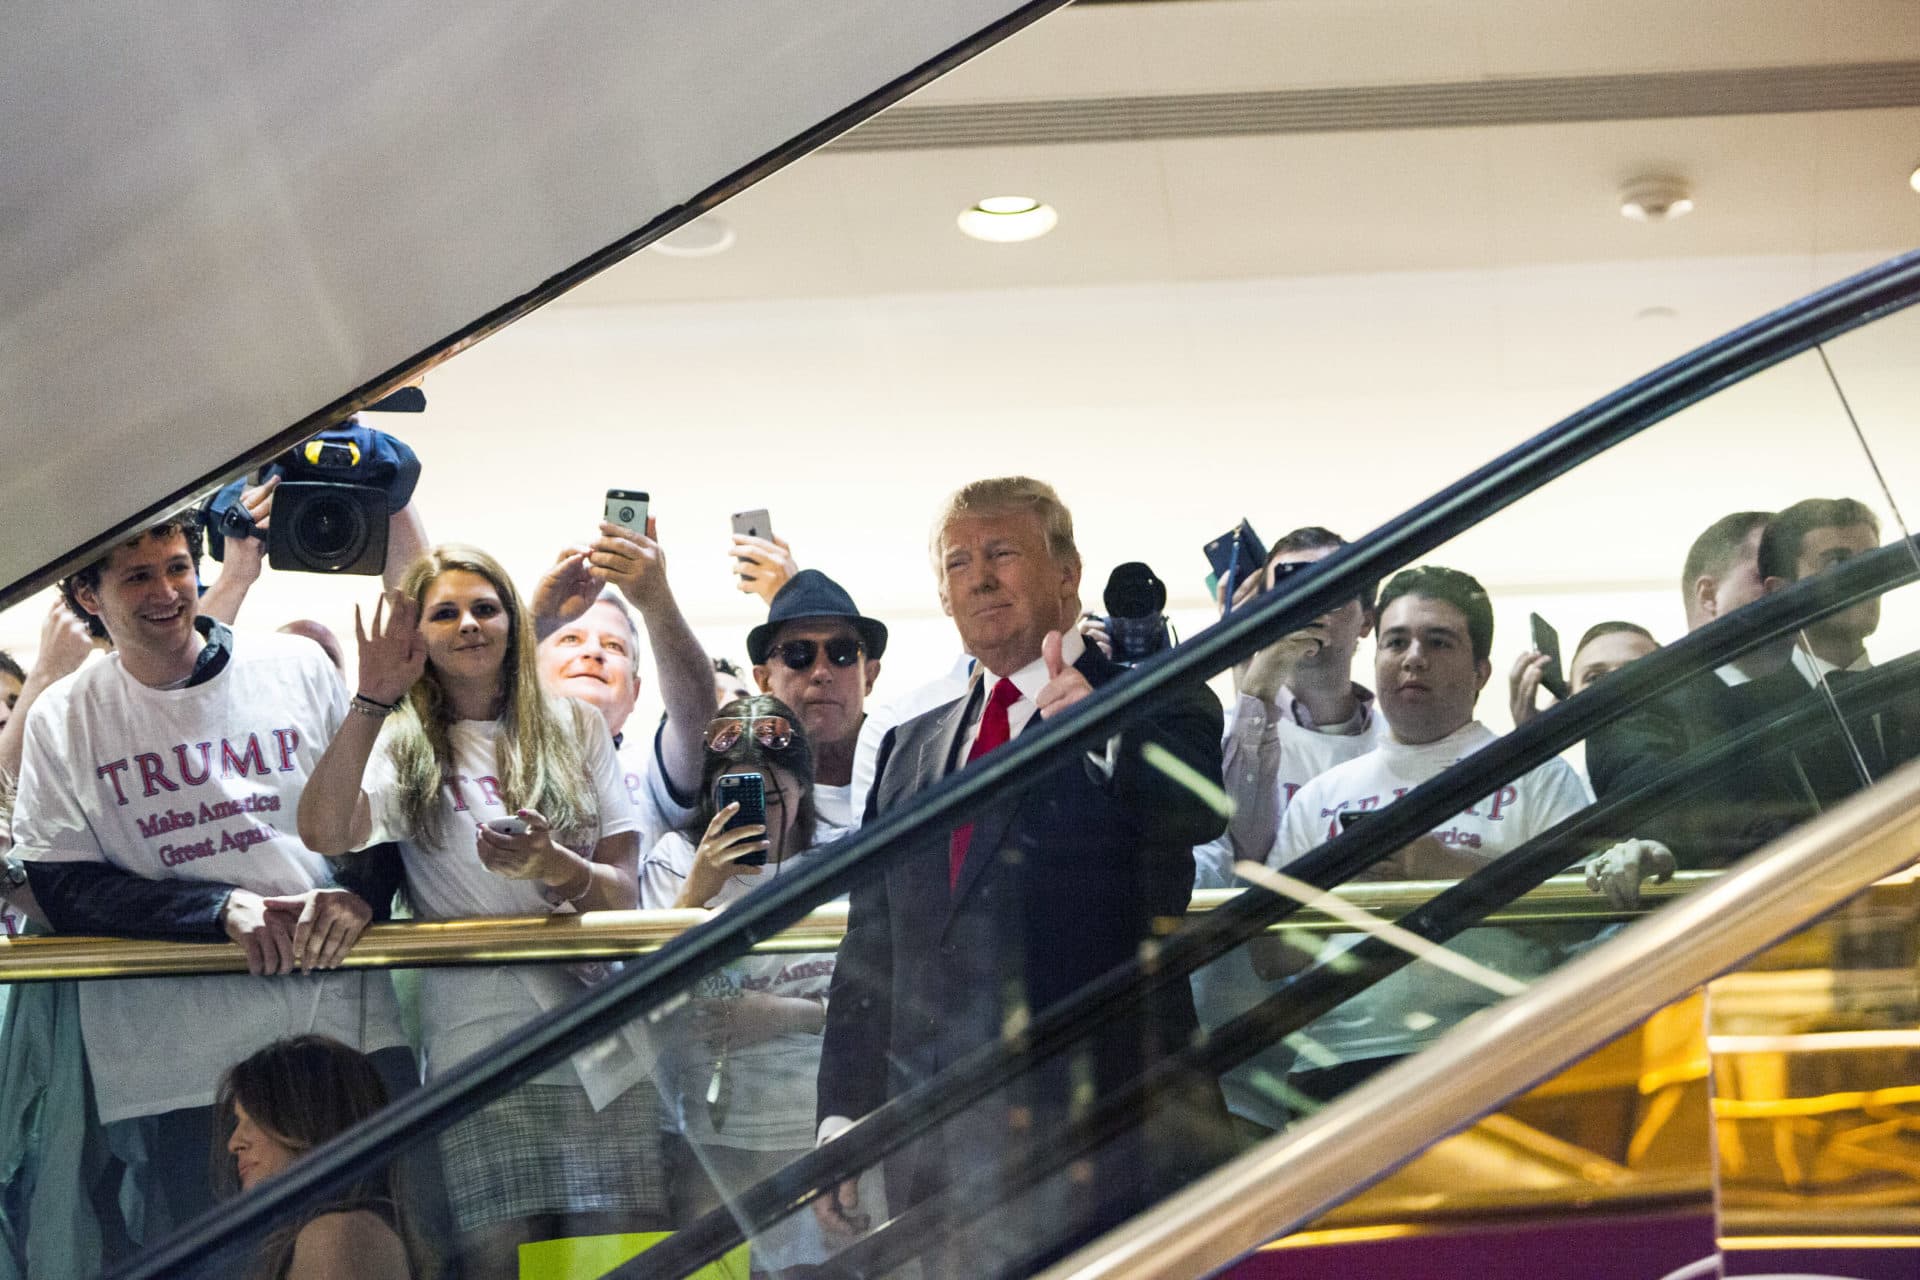 Donald Trump rides an escalator to a press event to announce his candidacy for the U.S. presidency at Trump Tower in 2015. (Christopher Gregory/Getty Images)